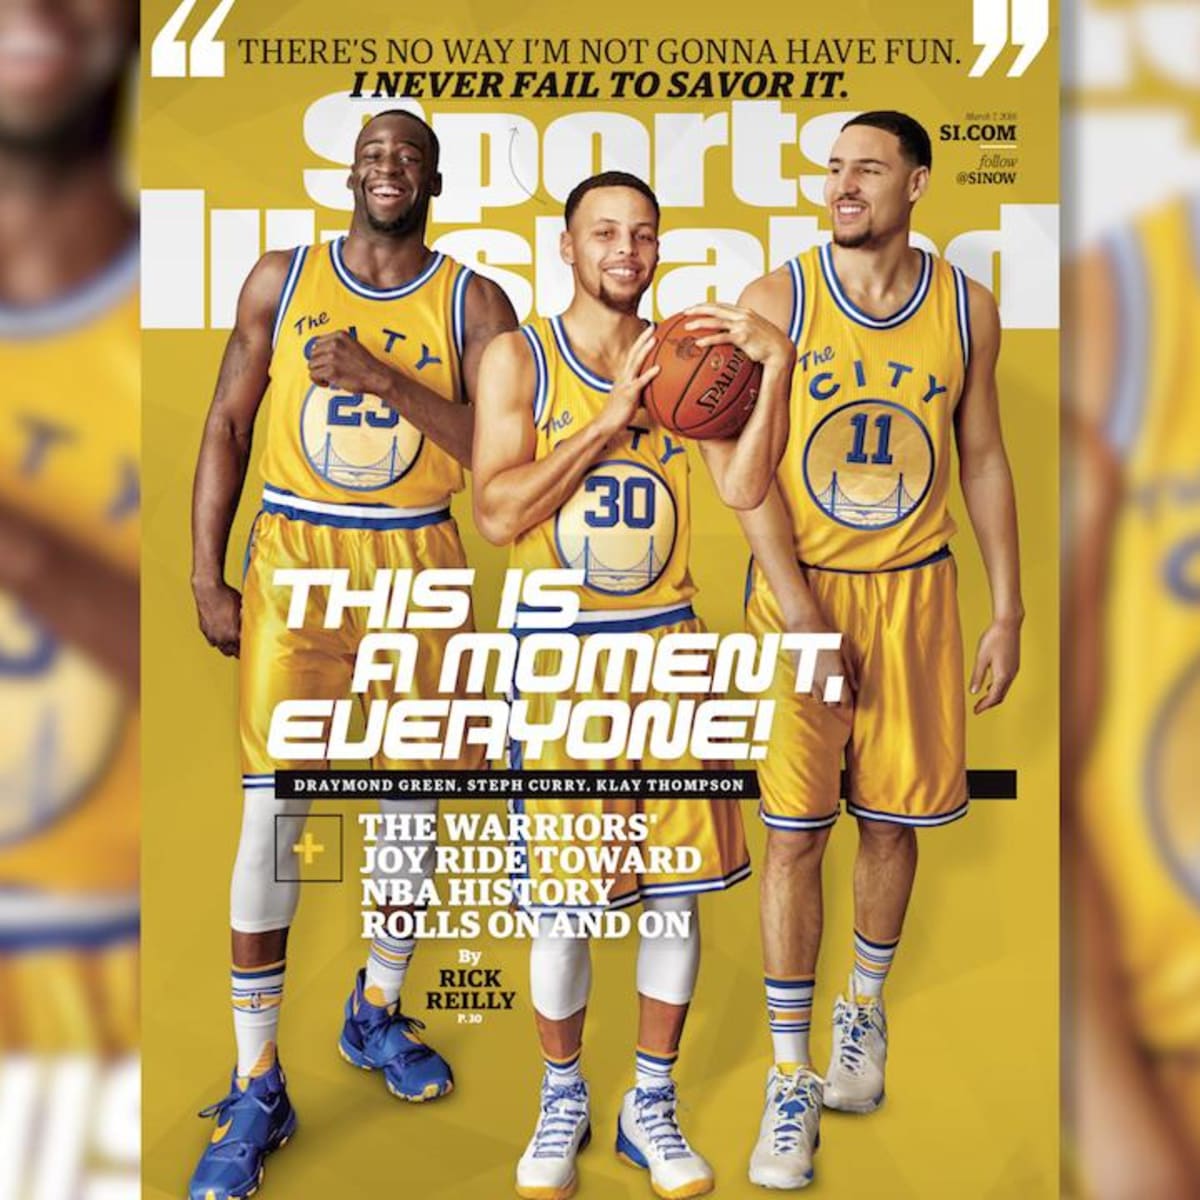 Golden State Warriors' Stephen Curry's off-court look - Sports Illustrated